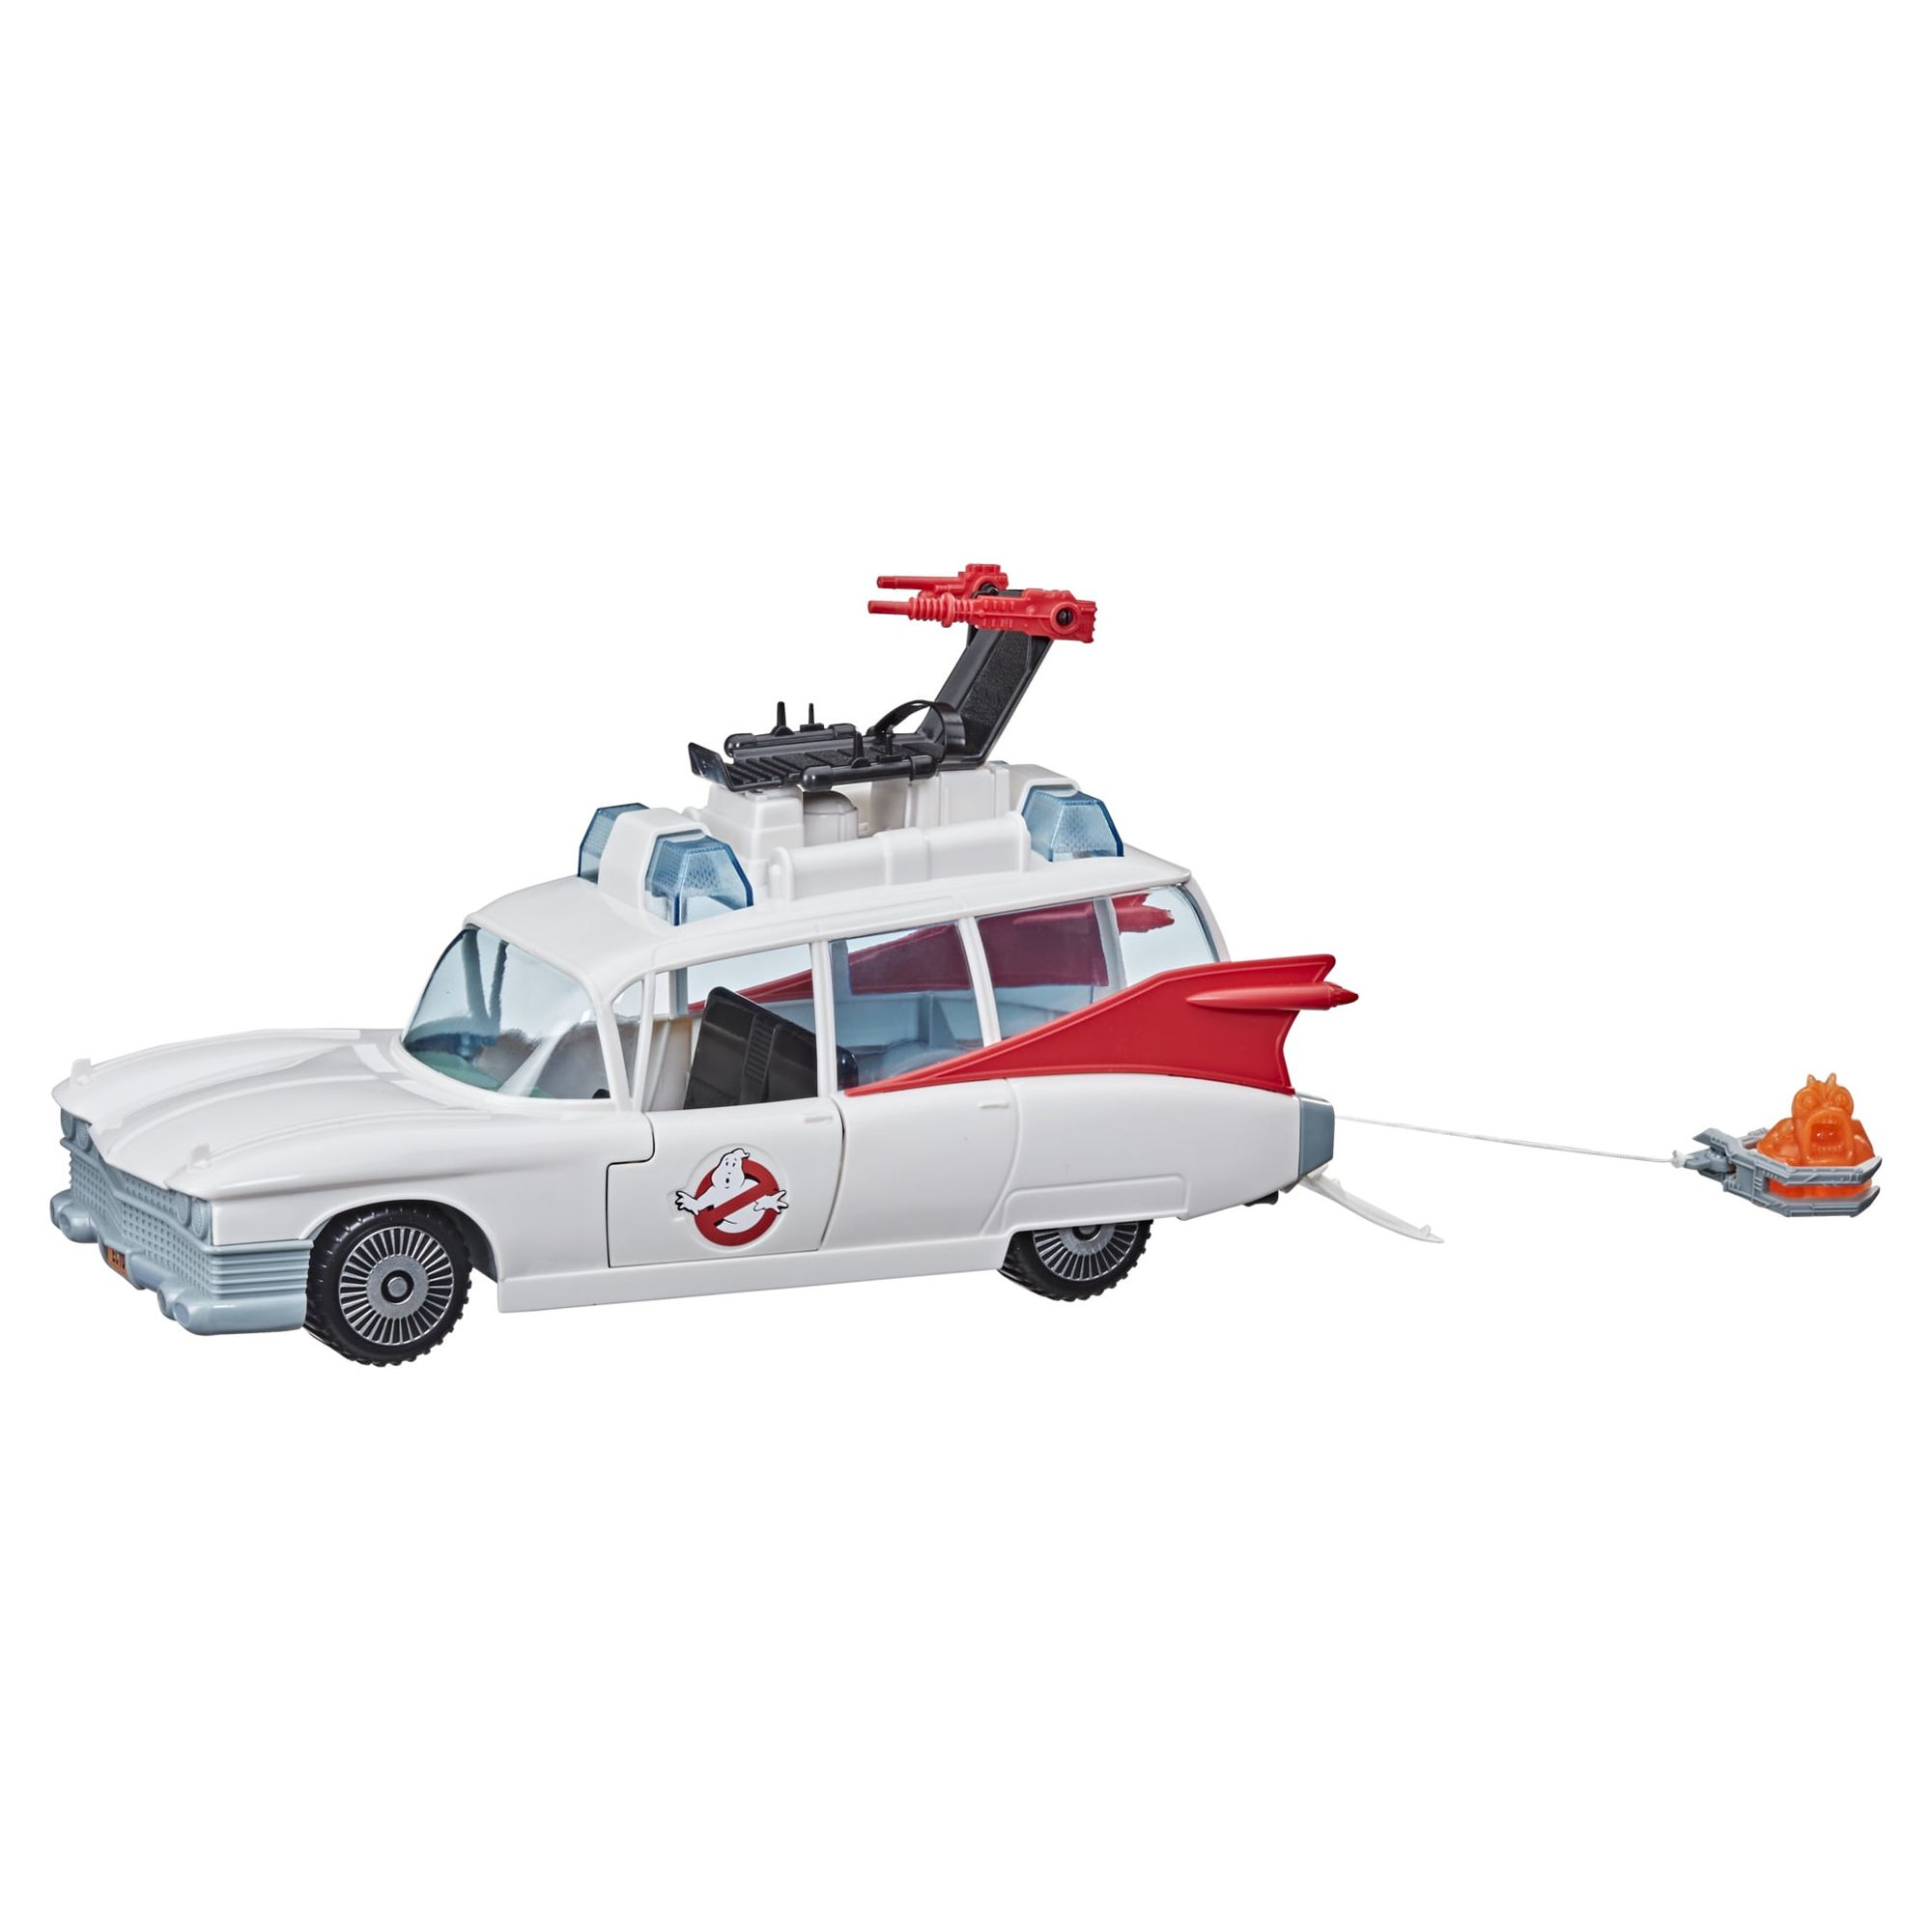 Ghostbusters Kenner Classics the Real Ghostbusters Ecto-1 Retro Vehicle - image 1 of 6